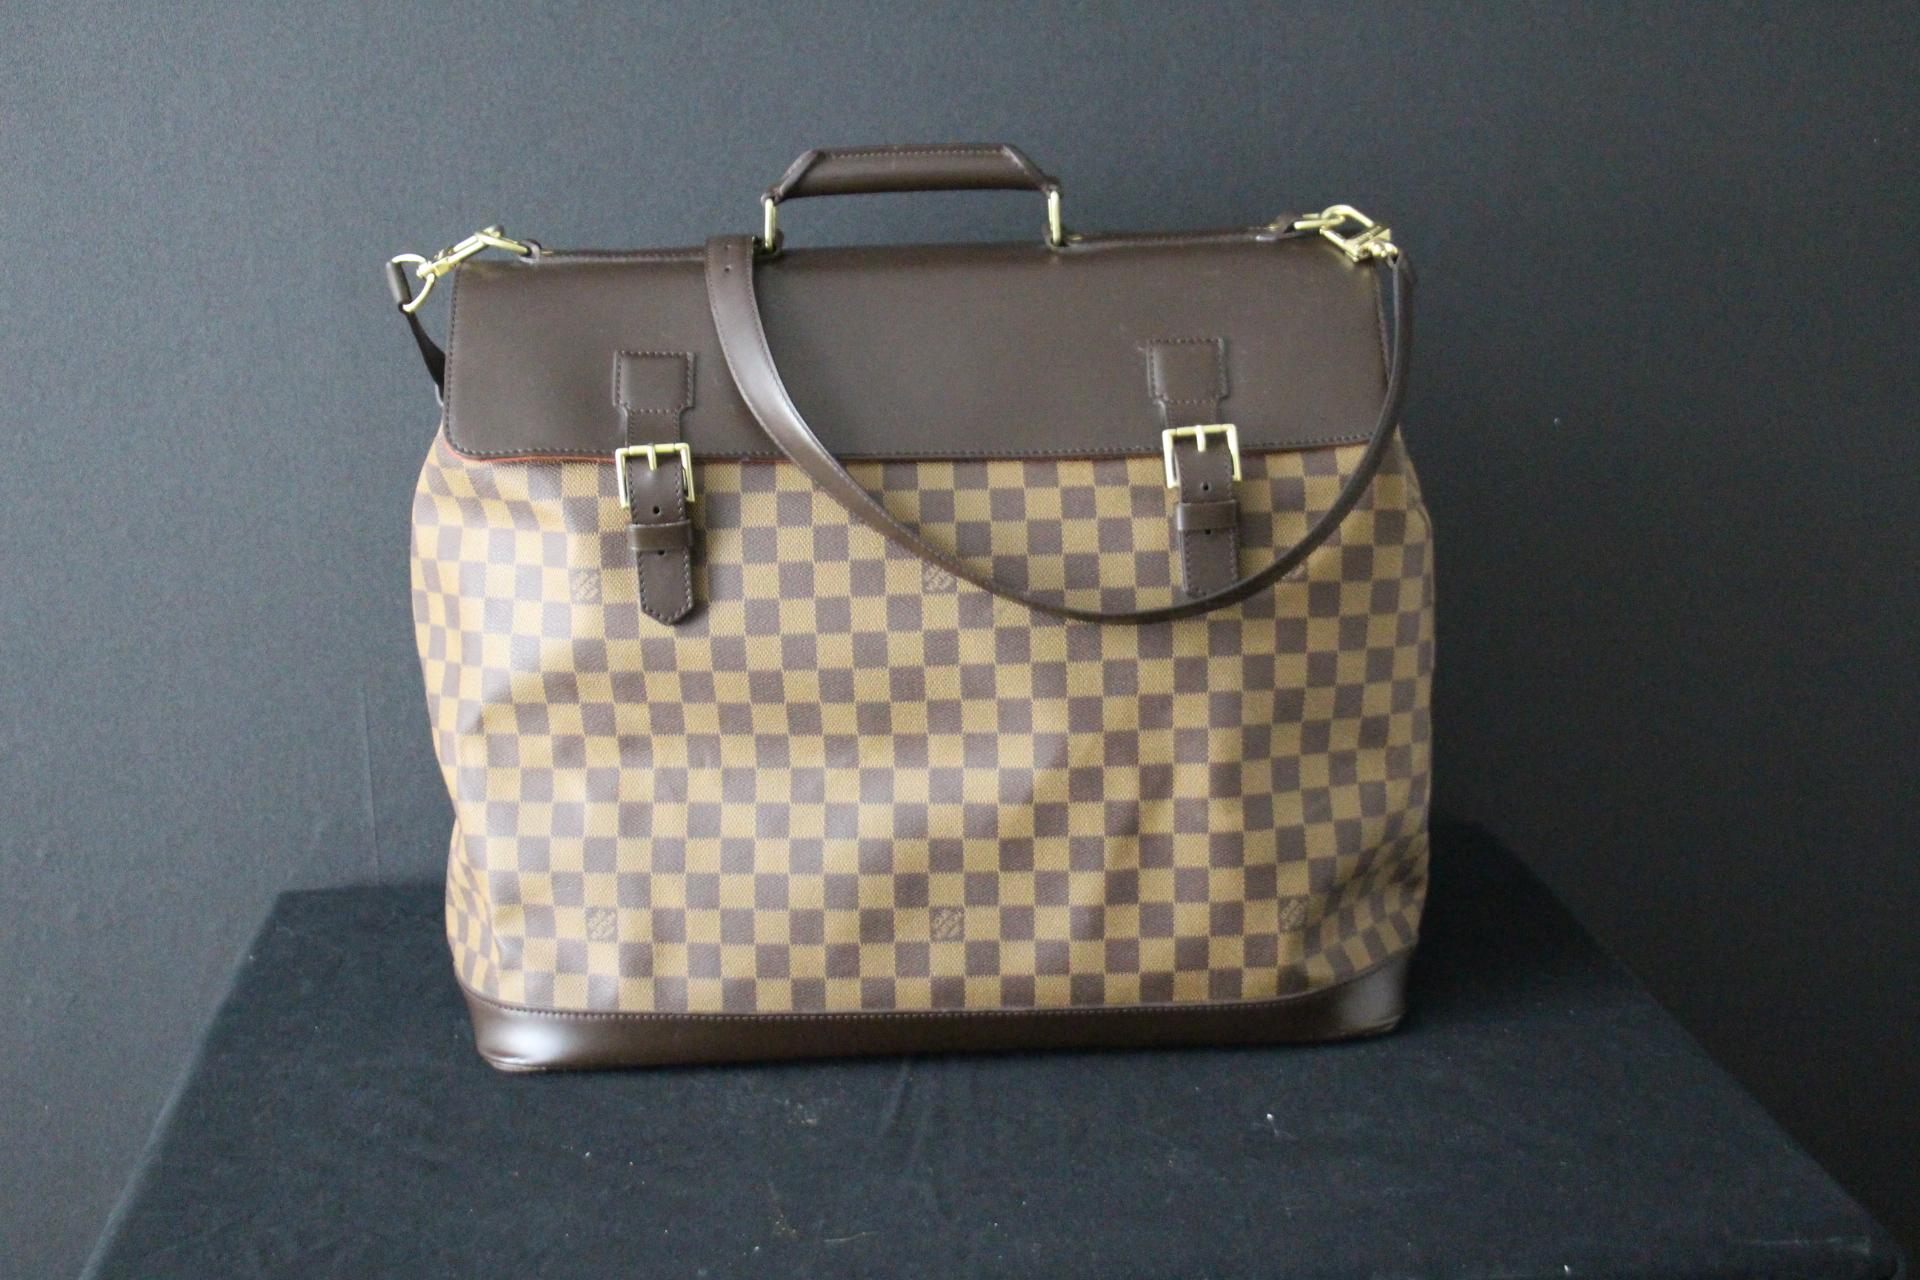 This beautiful large Louis Vuitton bag features the very sought after ebene damier canvas body with leather trim, a flat top handle, a detachable and adjustable leather shoulder strap, a flap top with belt buckle closures, and an back zip pocket.